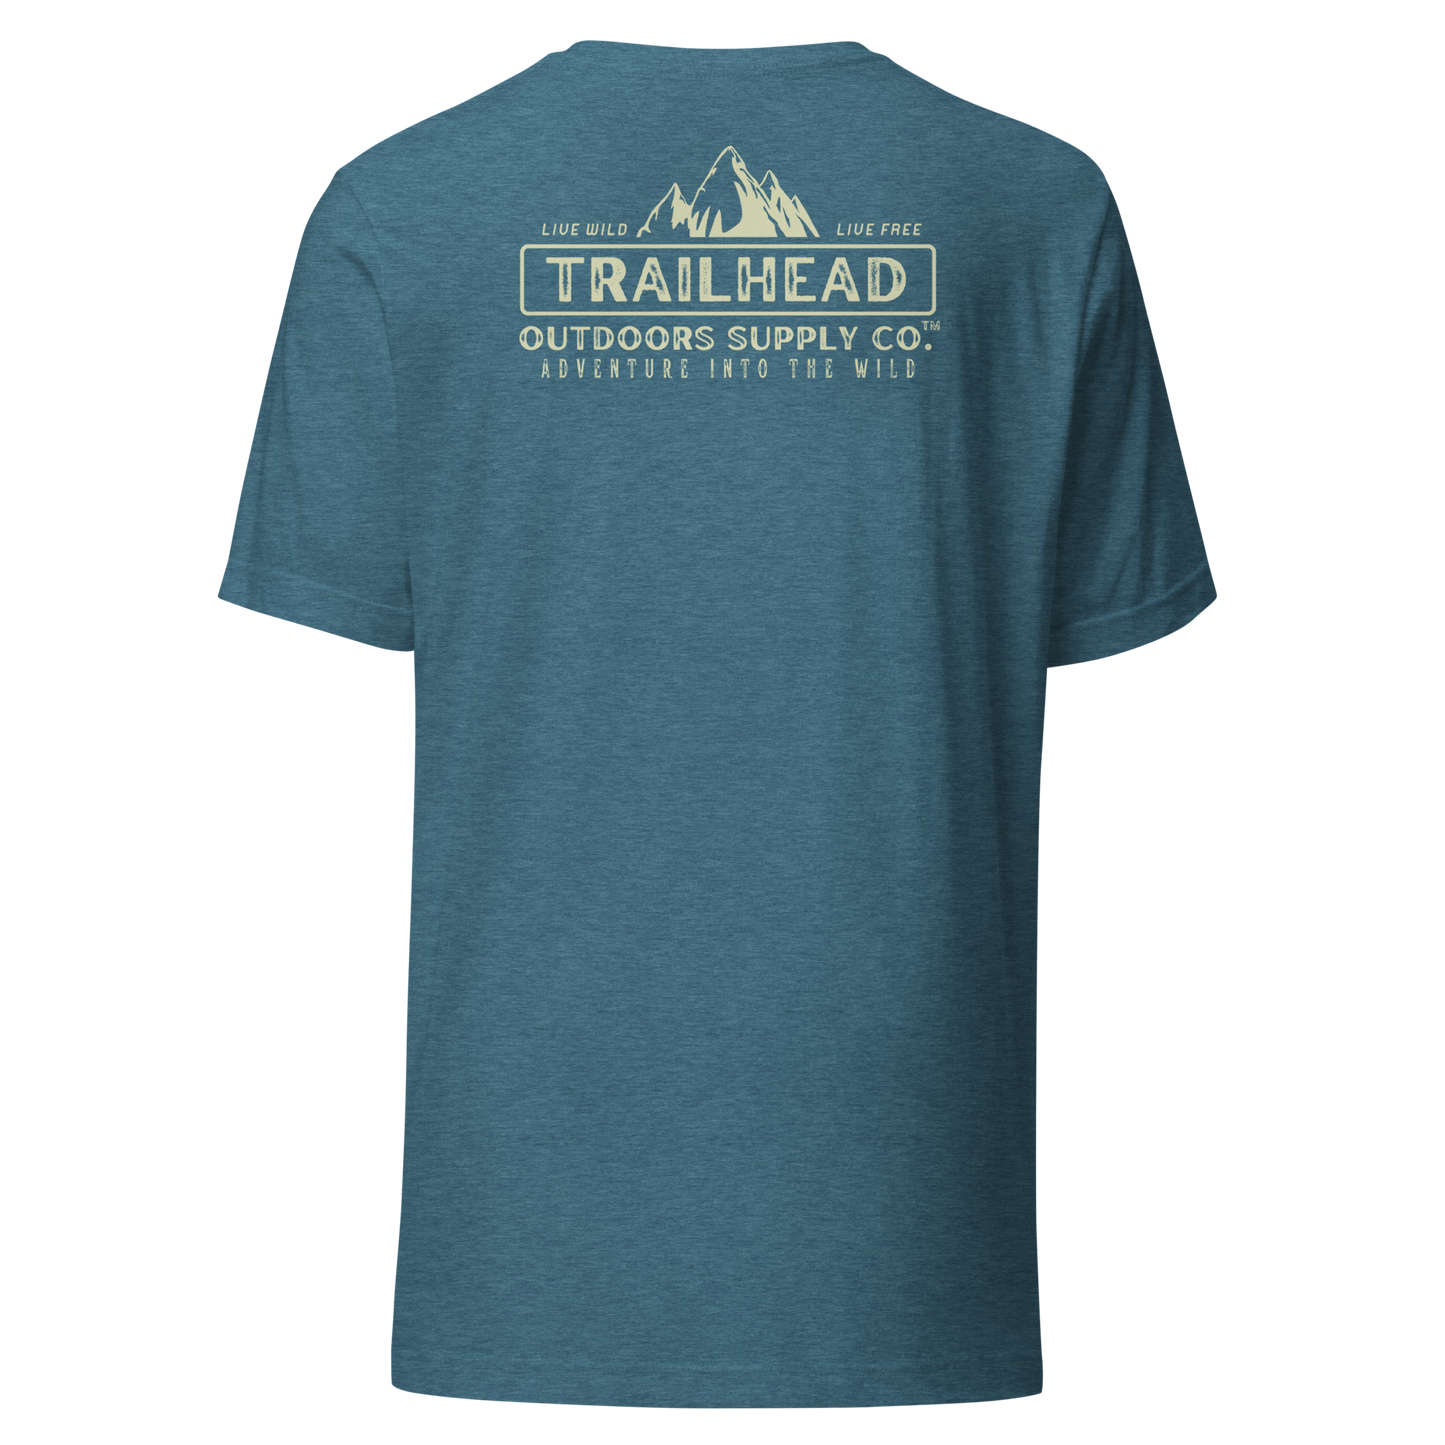 Trailhead Outdoors Supply Co.™ T-Shirt | Bella + Canvas 3001 | Front/Back